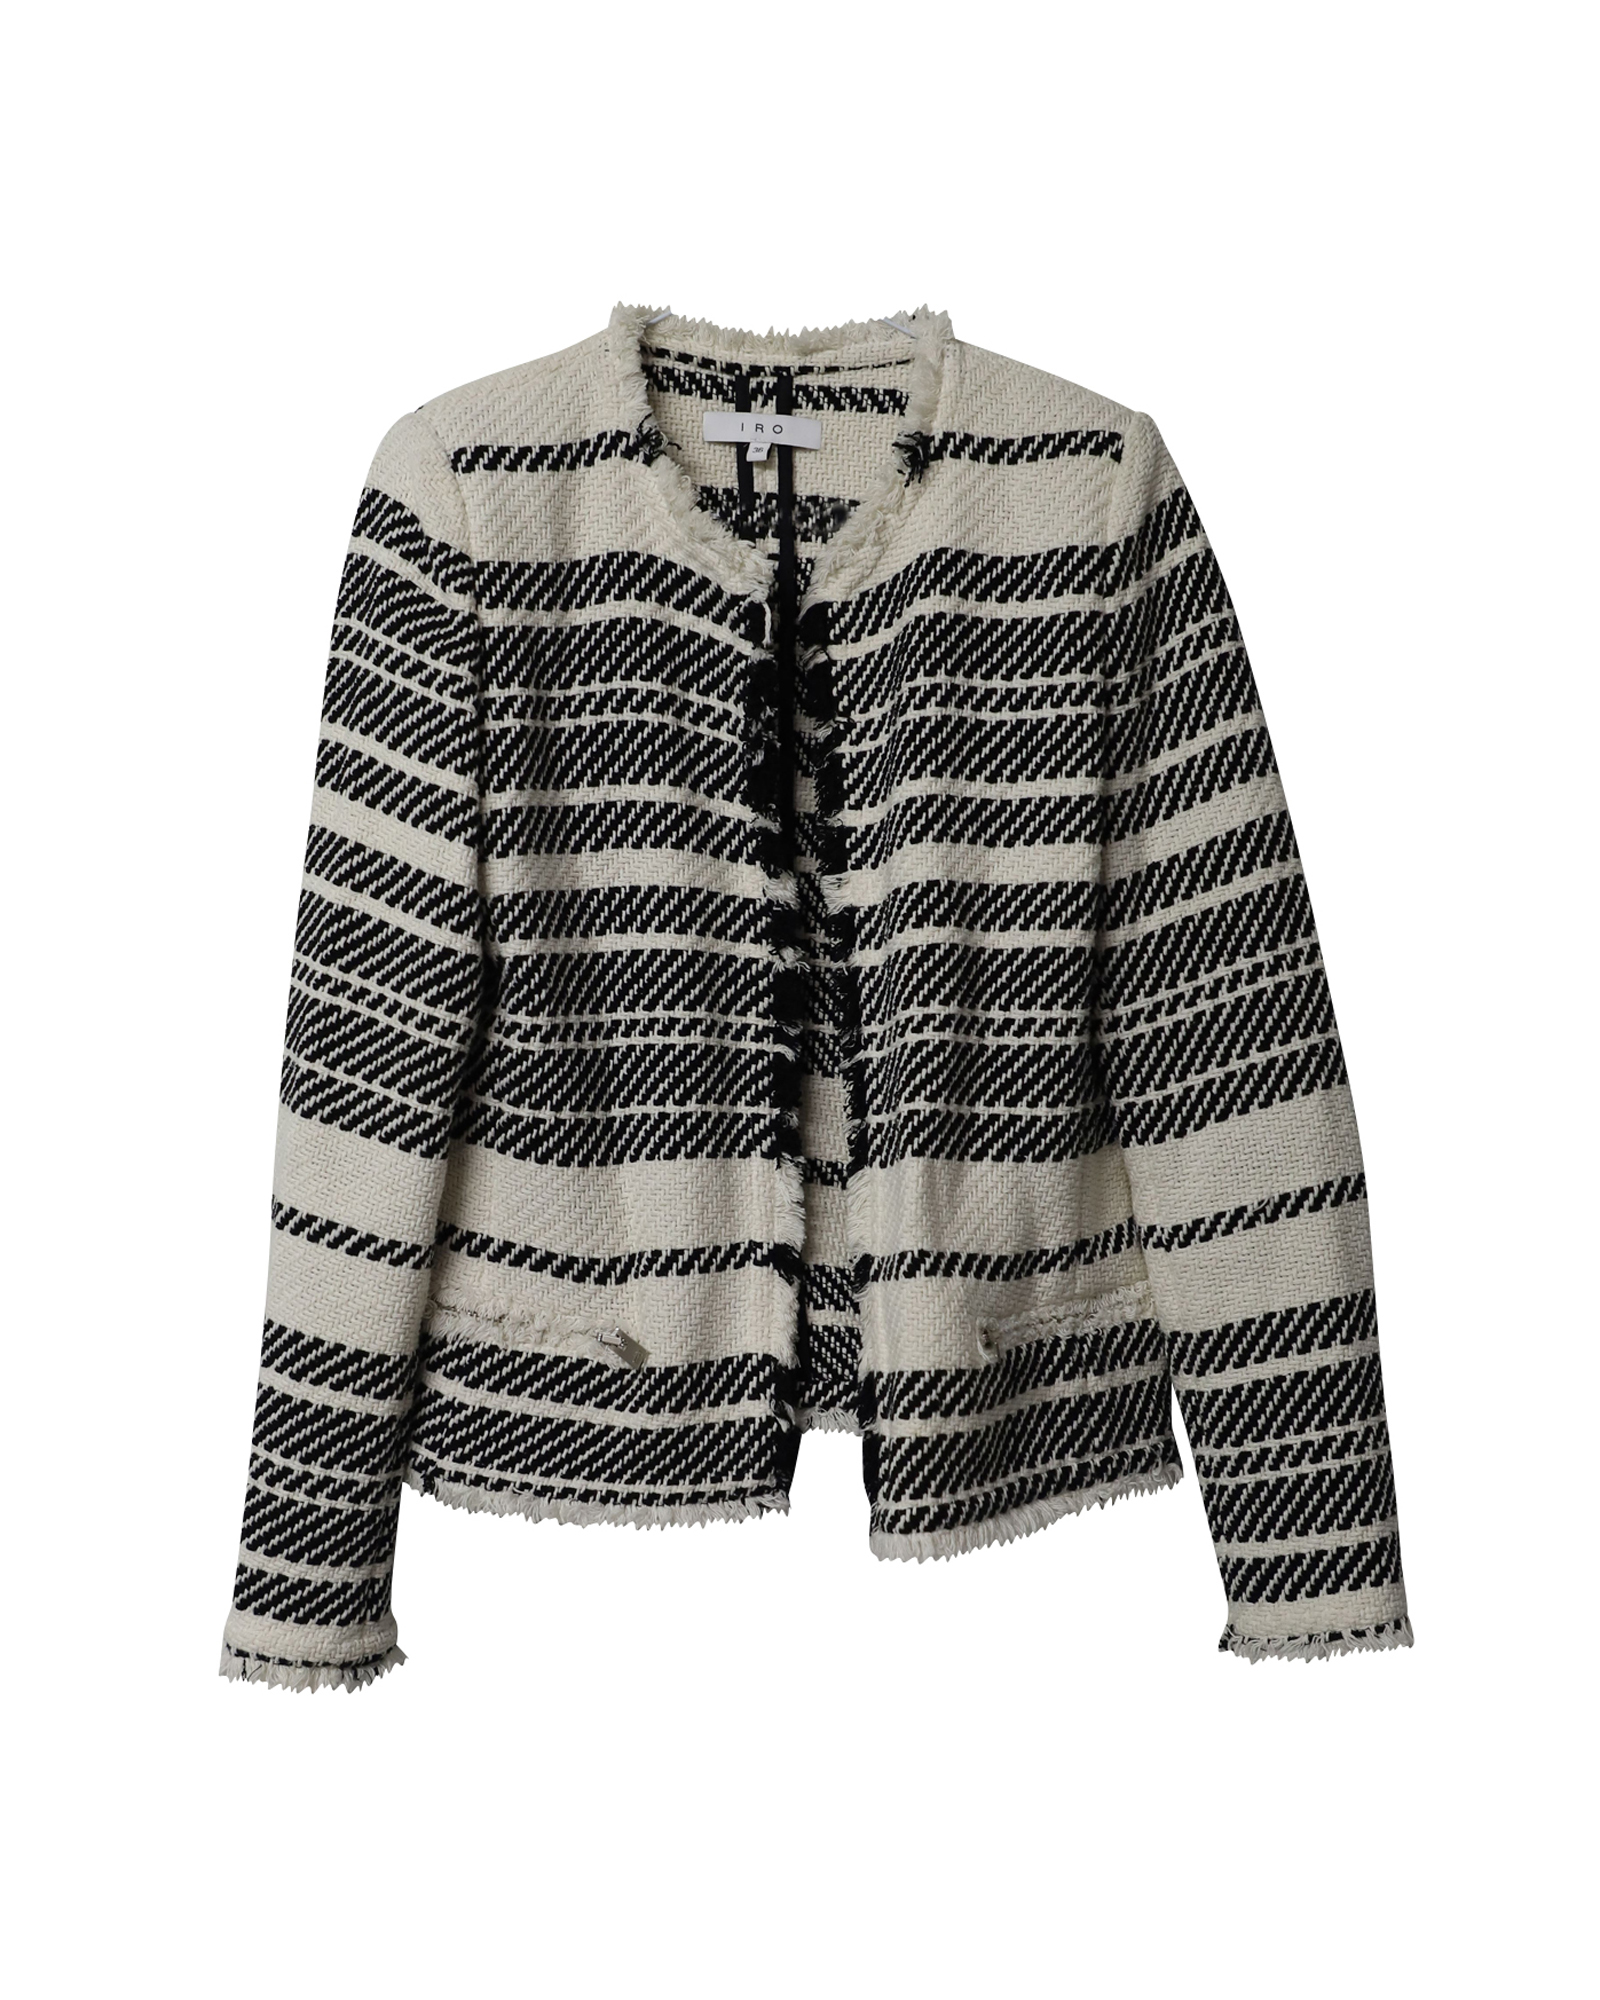 Striped Tweed Jacket in Black and White Cotton